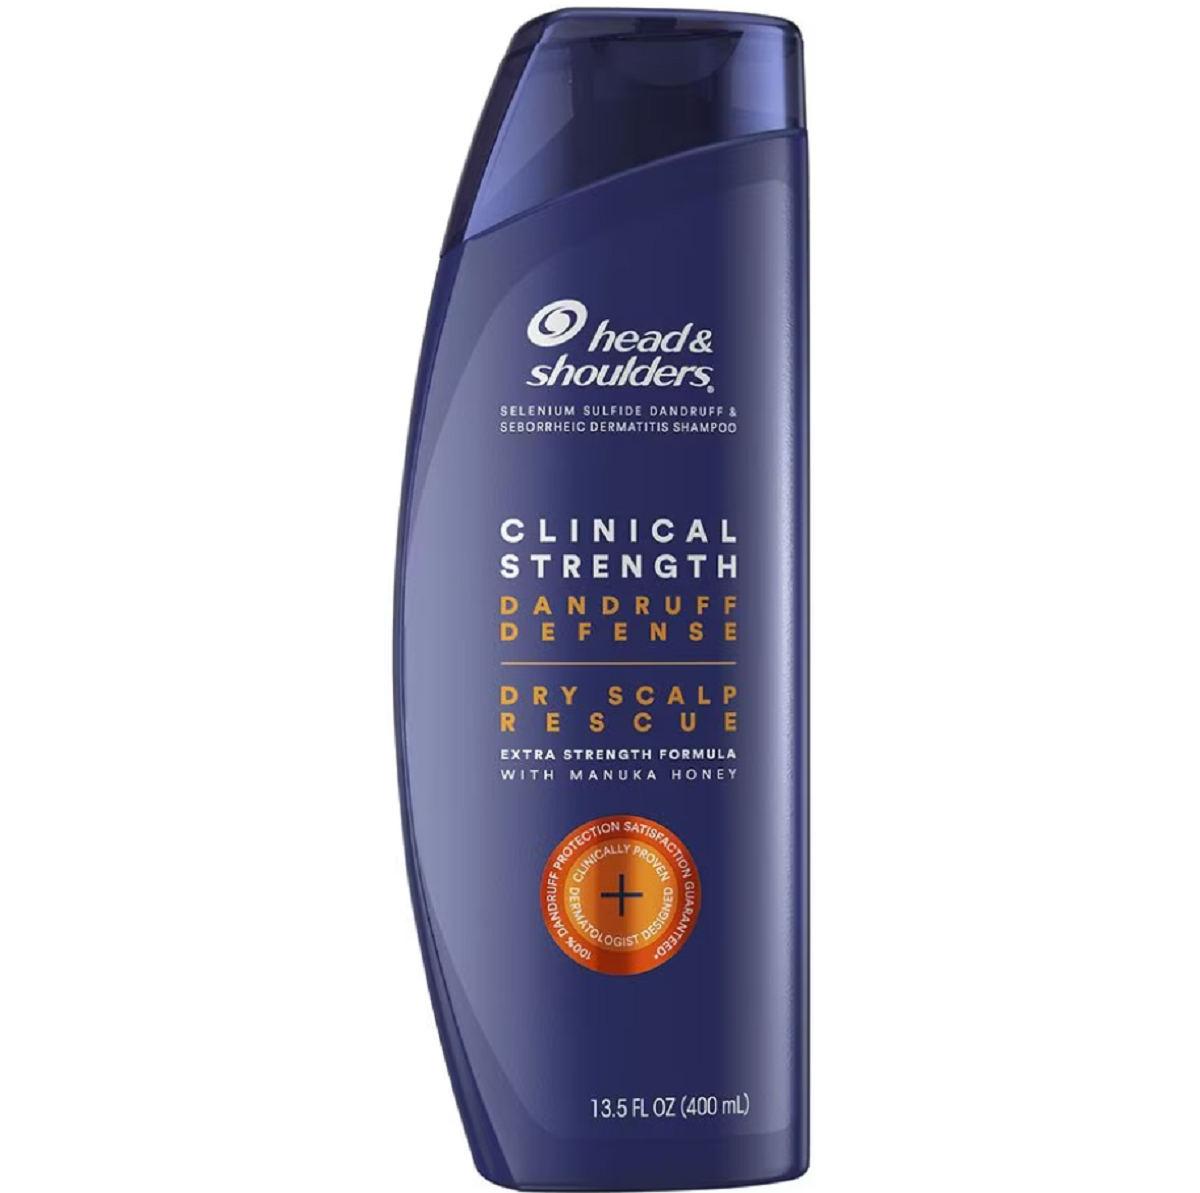 $3.00 (2) Head & Shoulders Hair Care Coupon